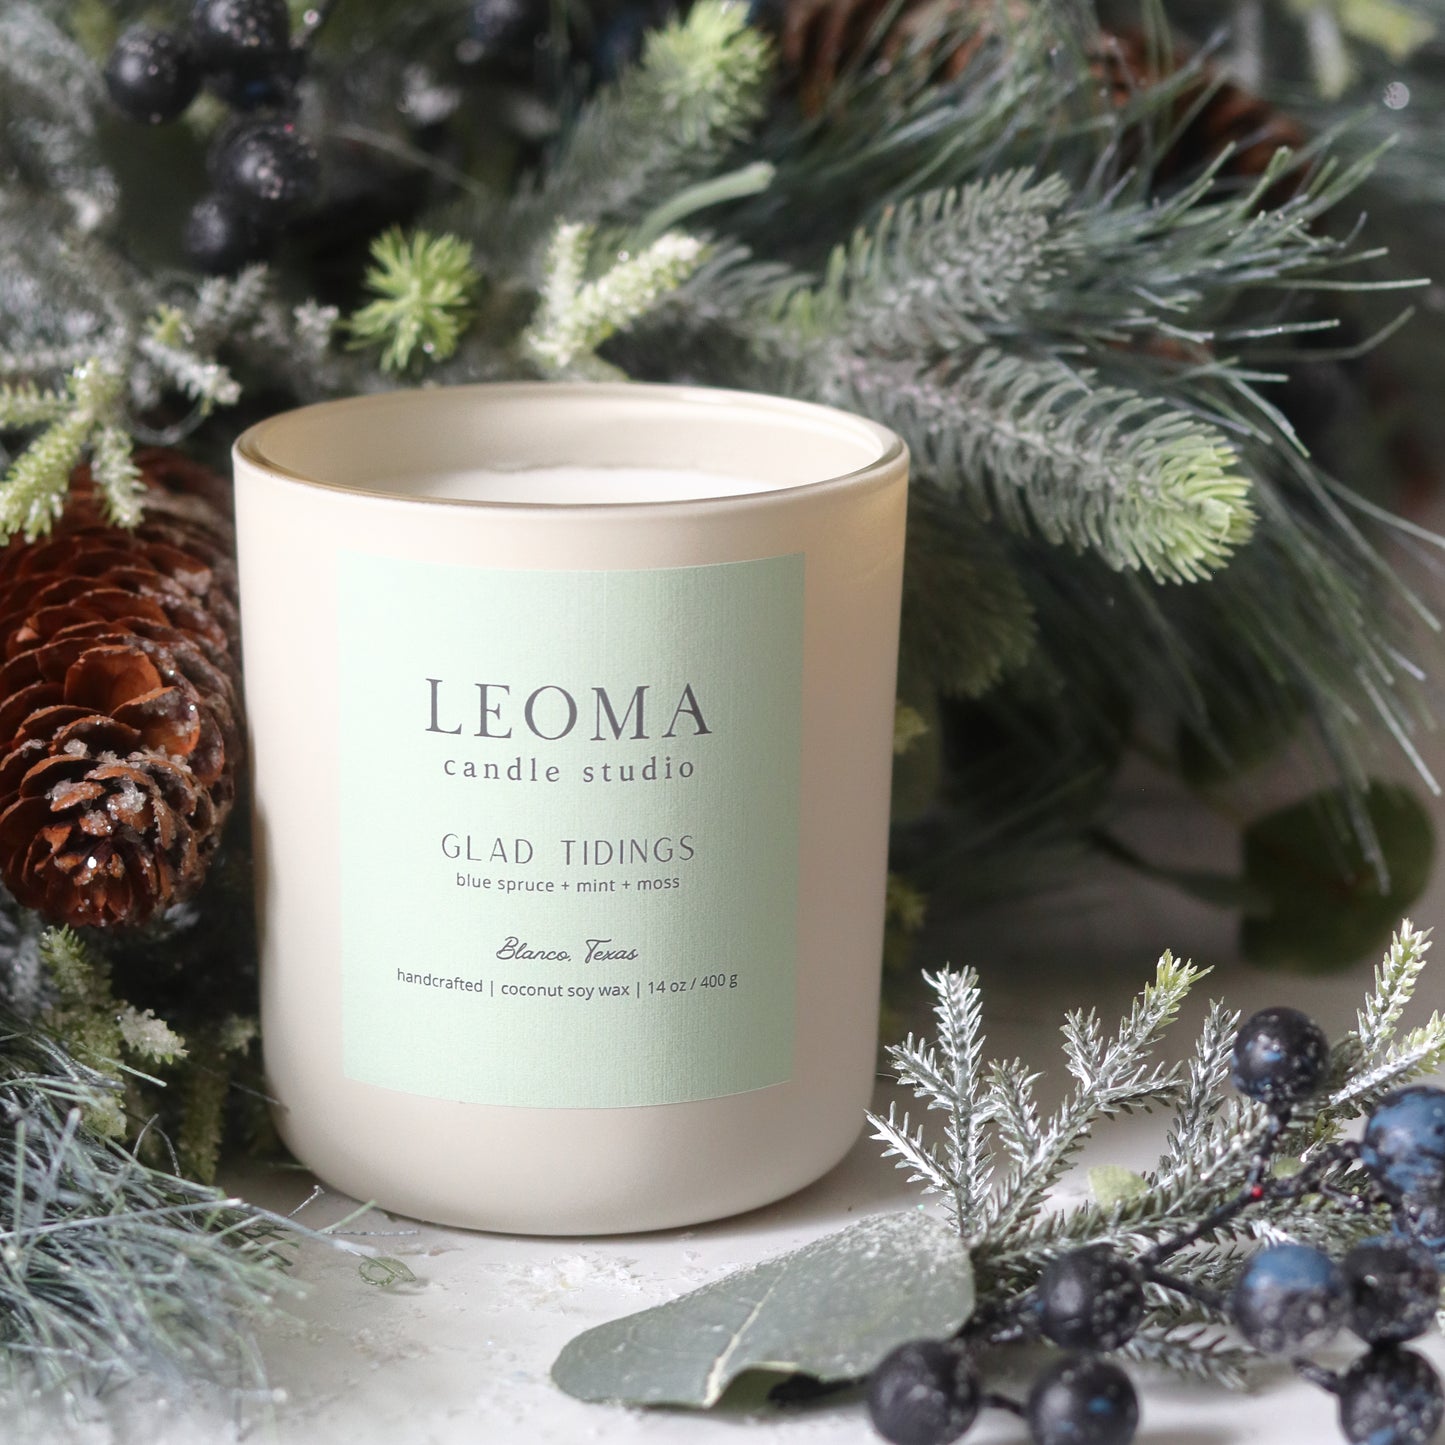 Handcrafted eco-friendly scented candle. Natural coconut & soy wax, toxin-free, 100% cotton wicks. cream vessel. Glad Tidings scented.